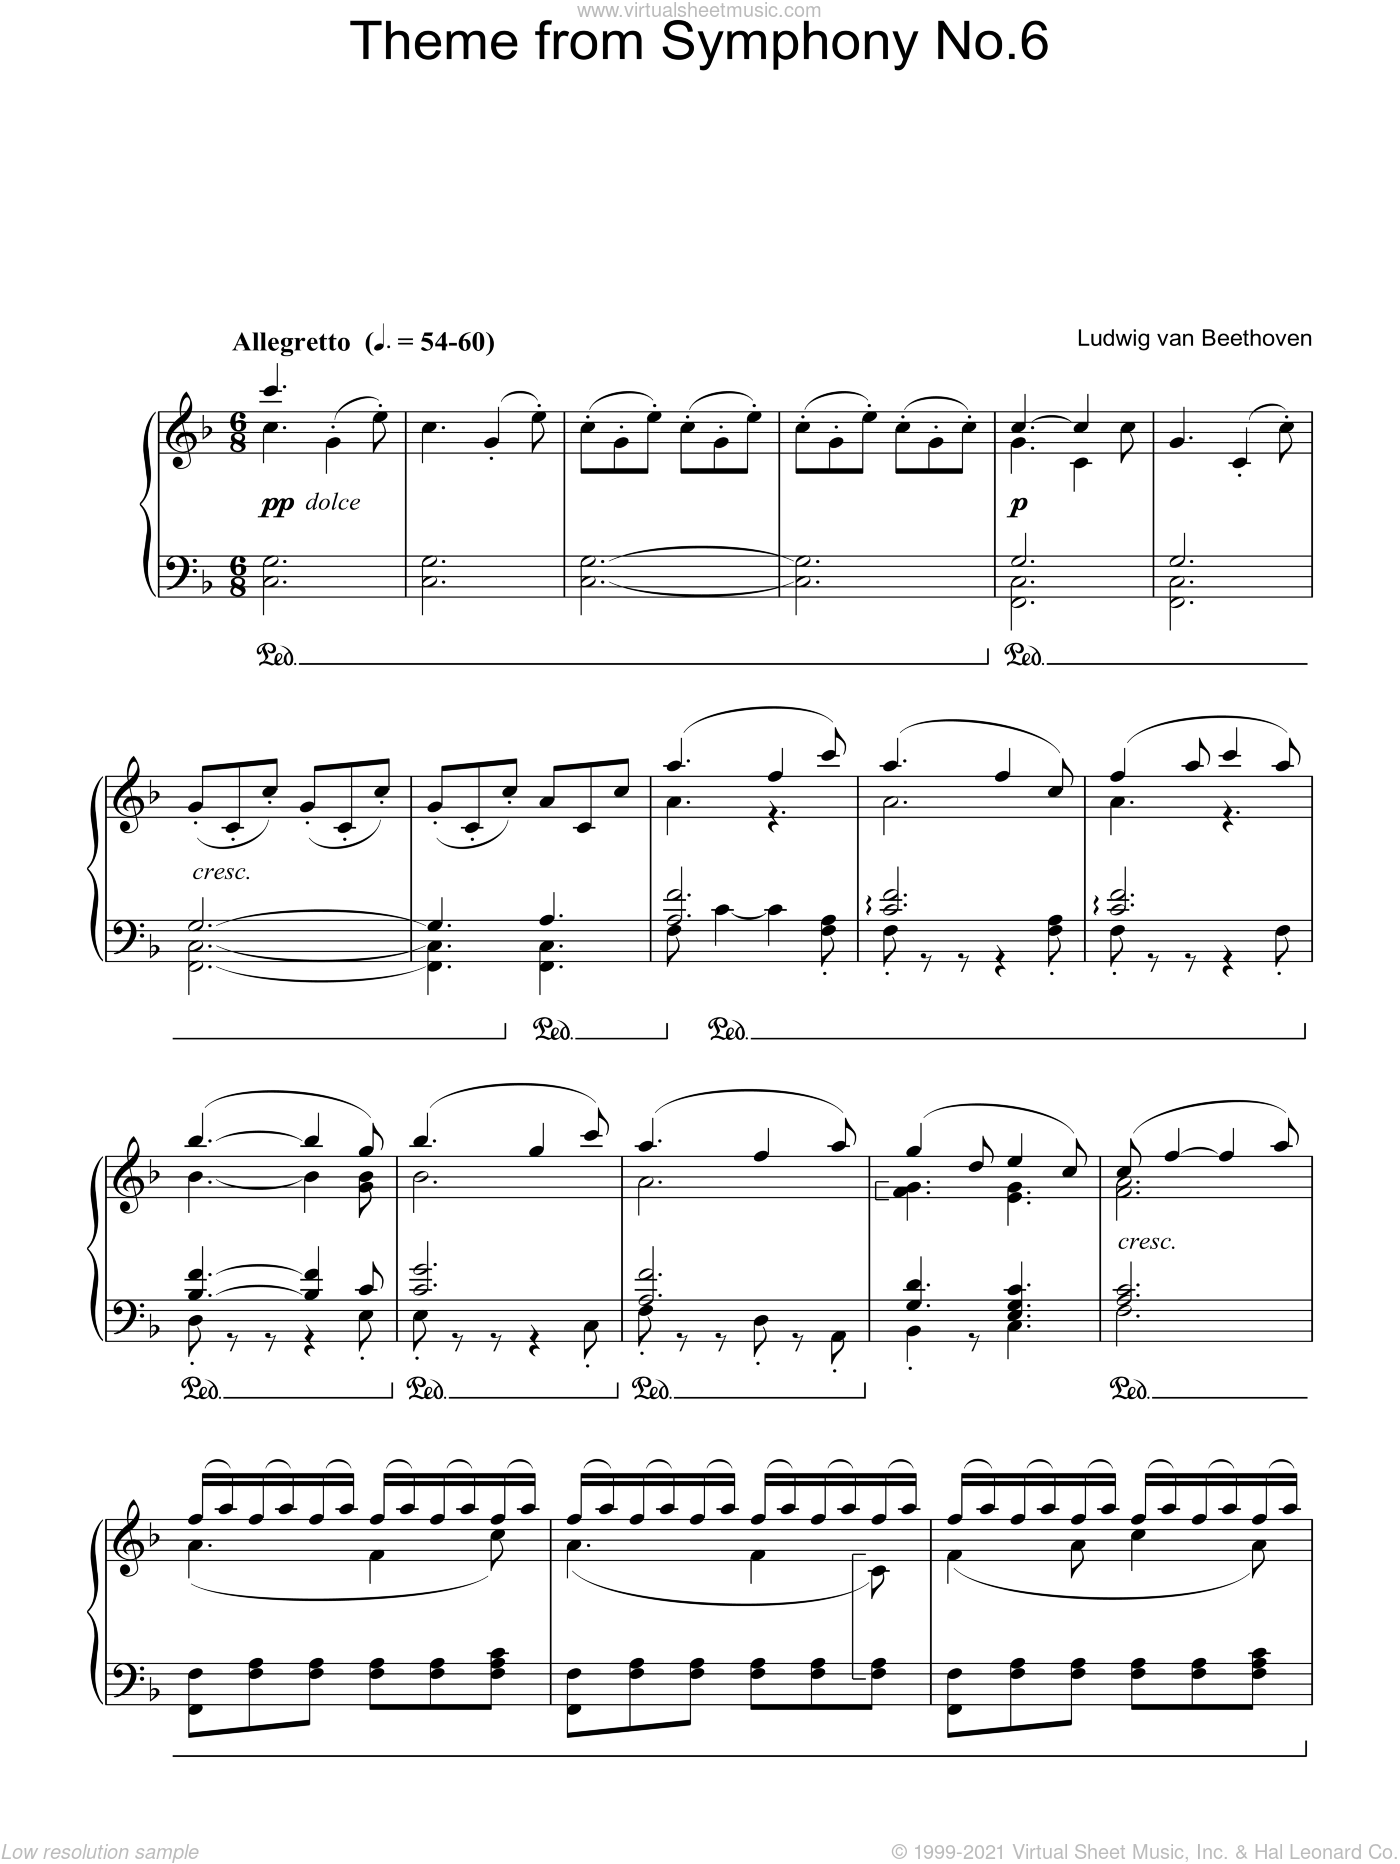 Beethoven - Symphony No.6 (Pastoral), 5th Movement sheet music for